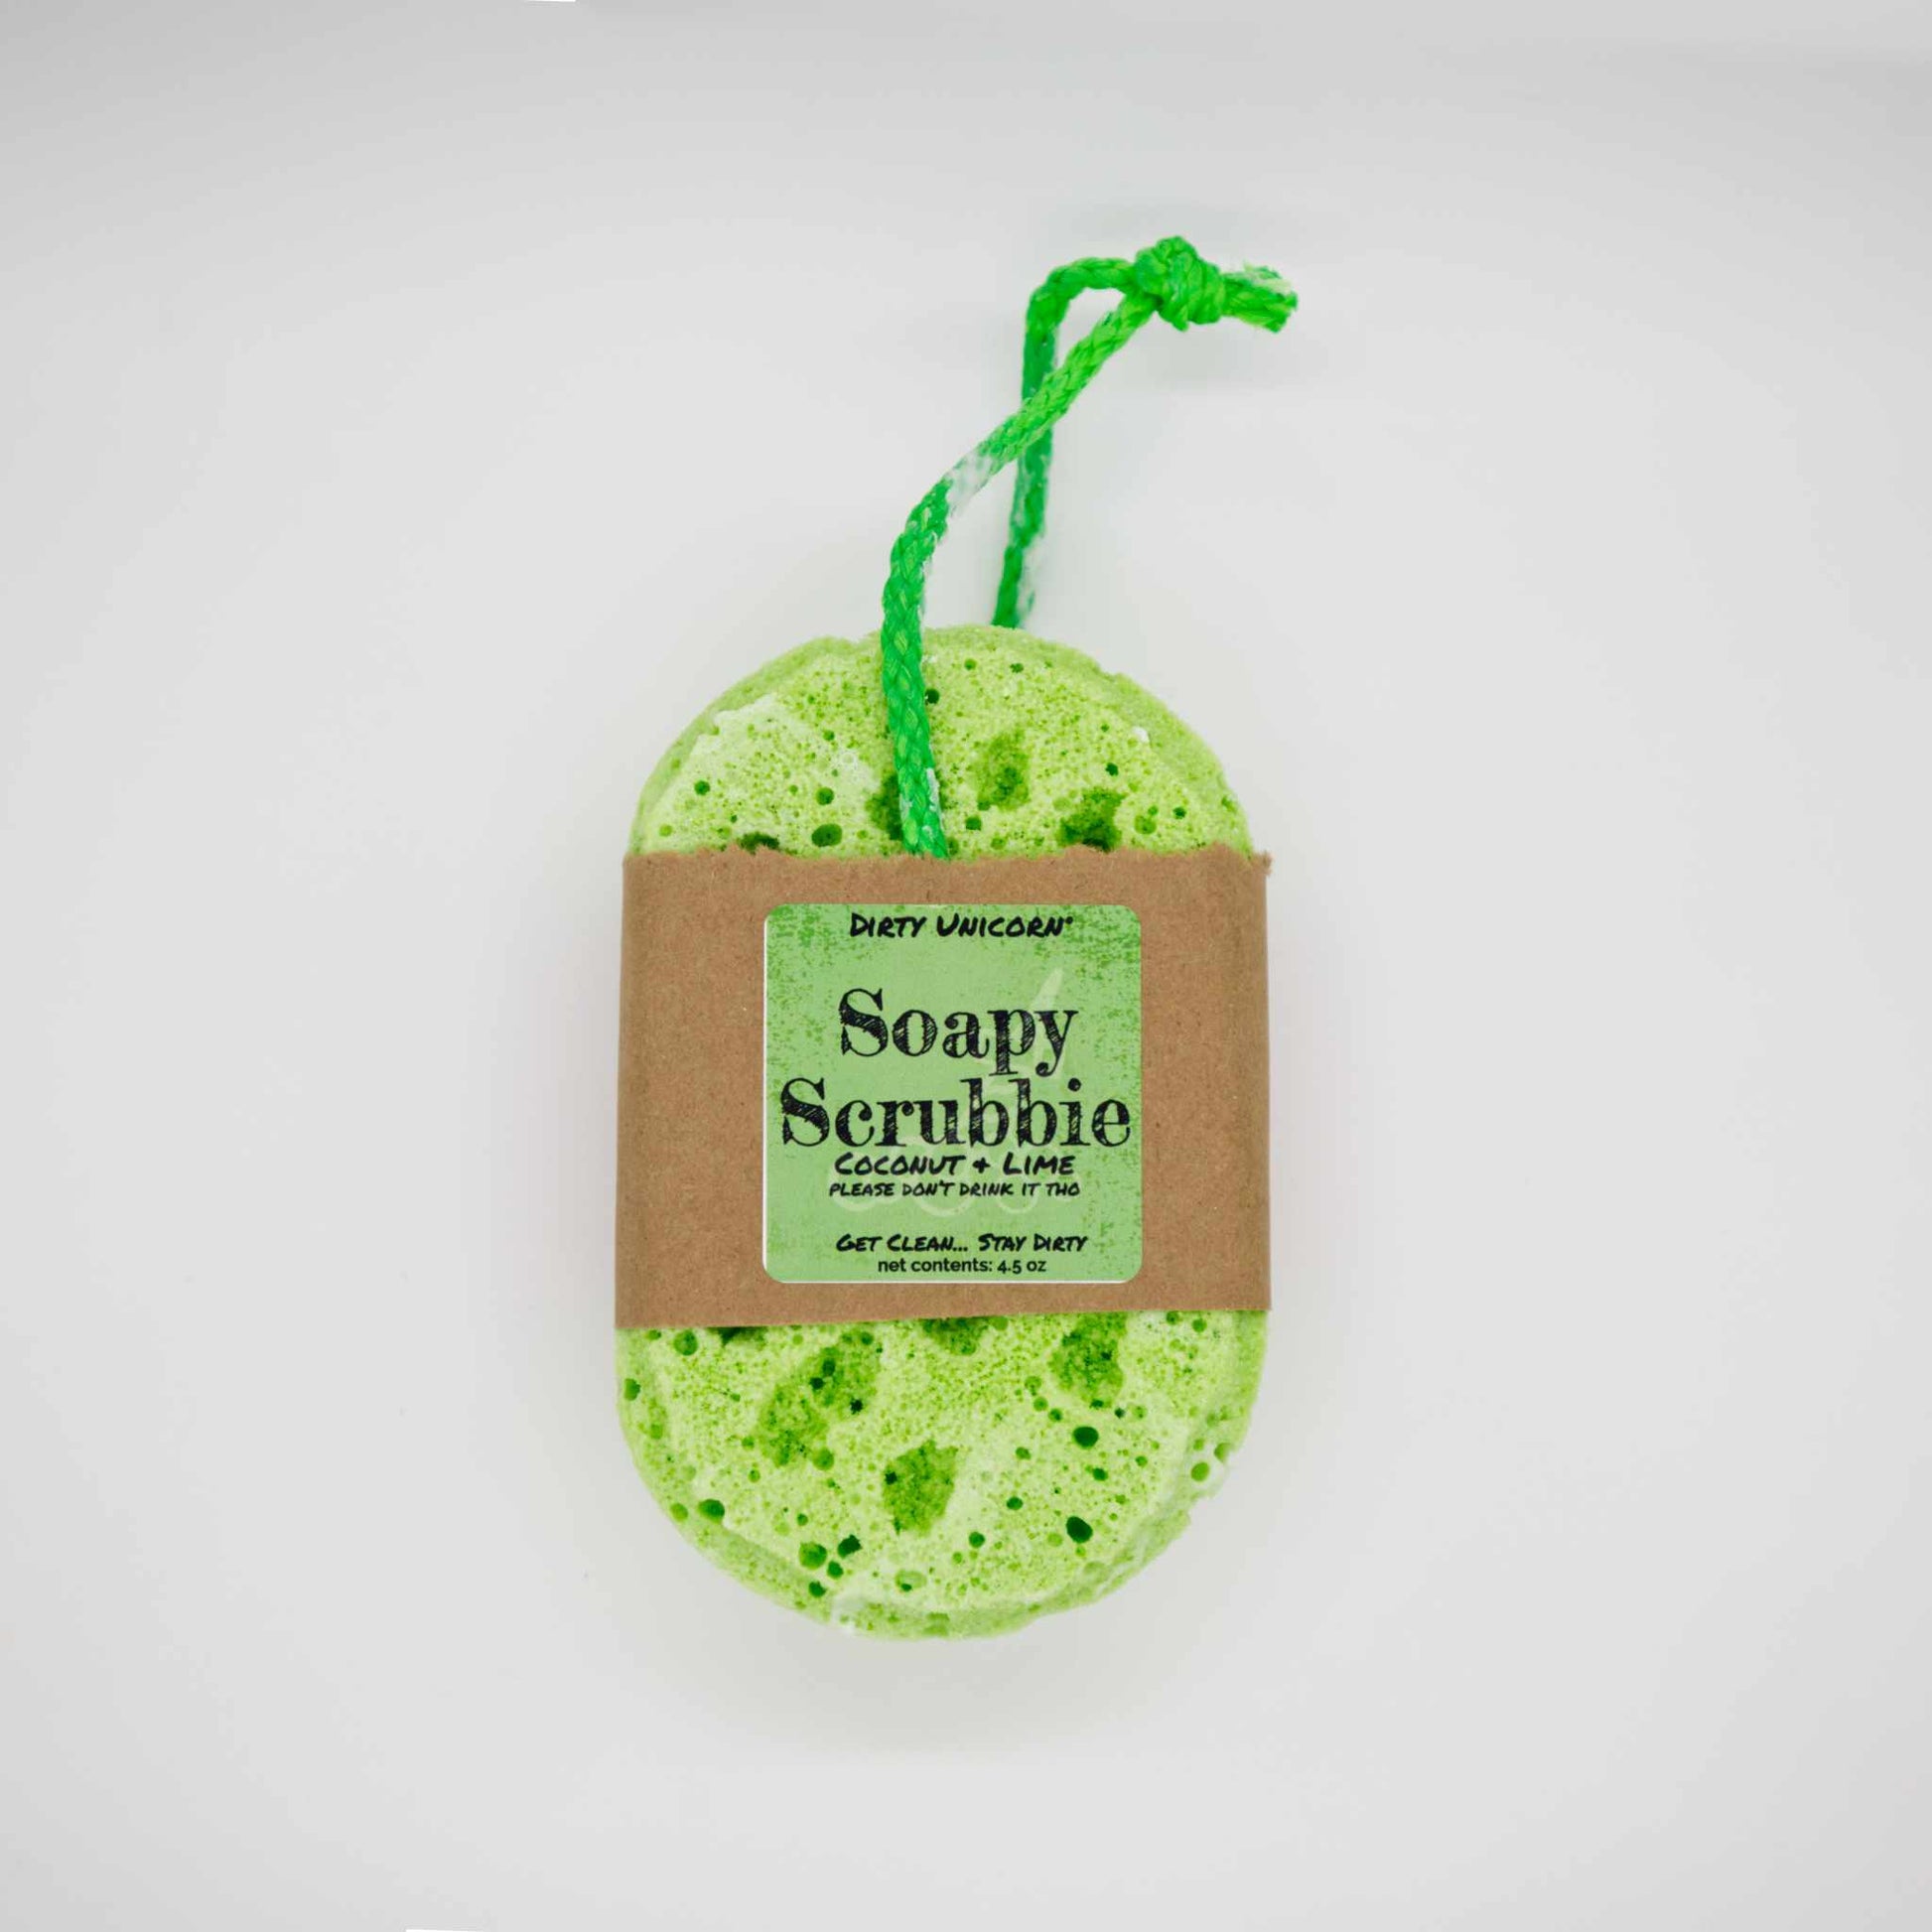 bright green  bath sponge with green rope for hanging on blank white background. Sponge is wrapped in brown Kraft paper belly band with a green label barring product title